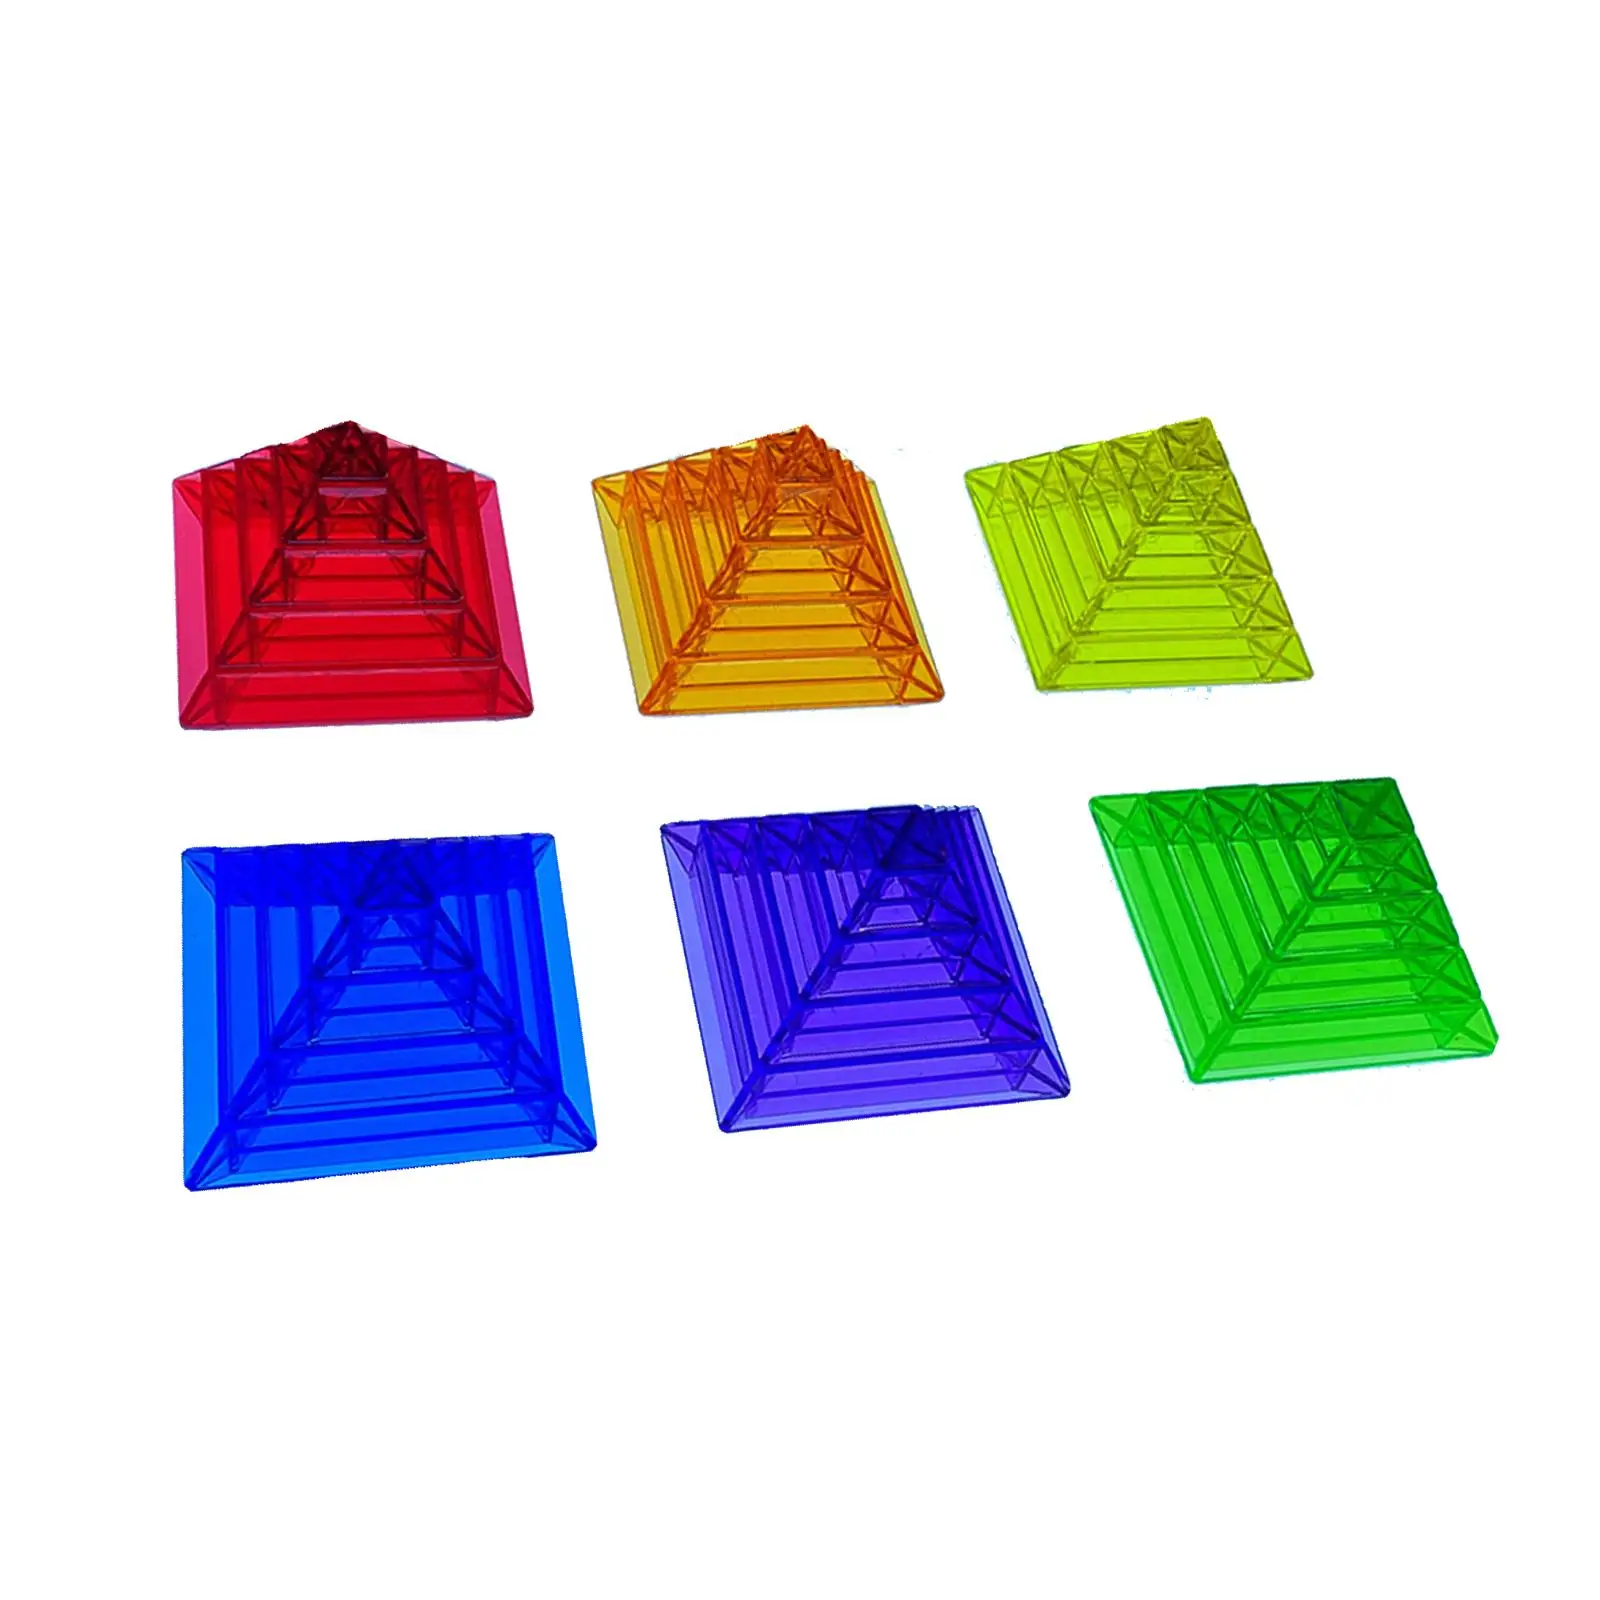 Educational Pyramid  Toys Puzzles Colorful Stacking  Montessori Building Fun ABS Diamond Blocks Balancing   for Toddler